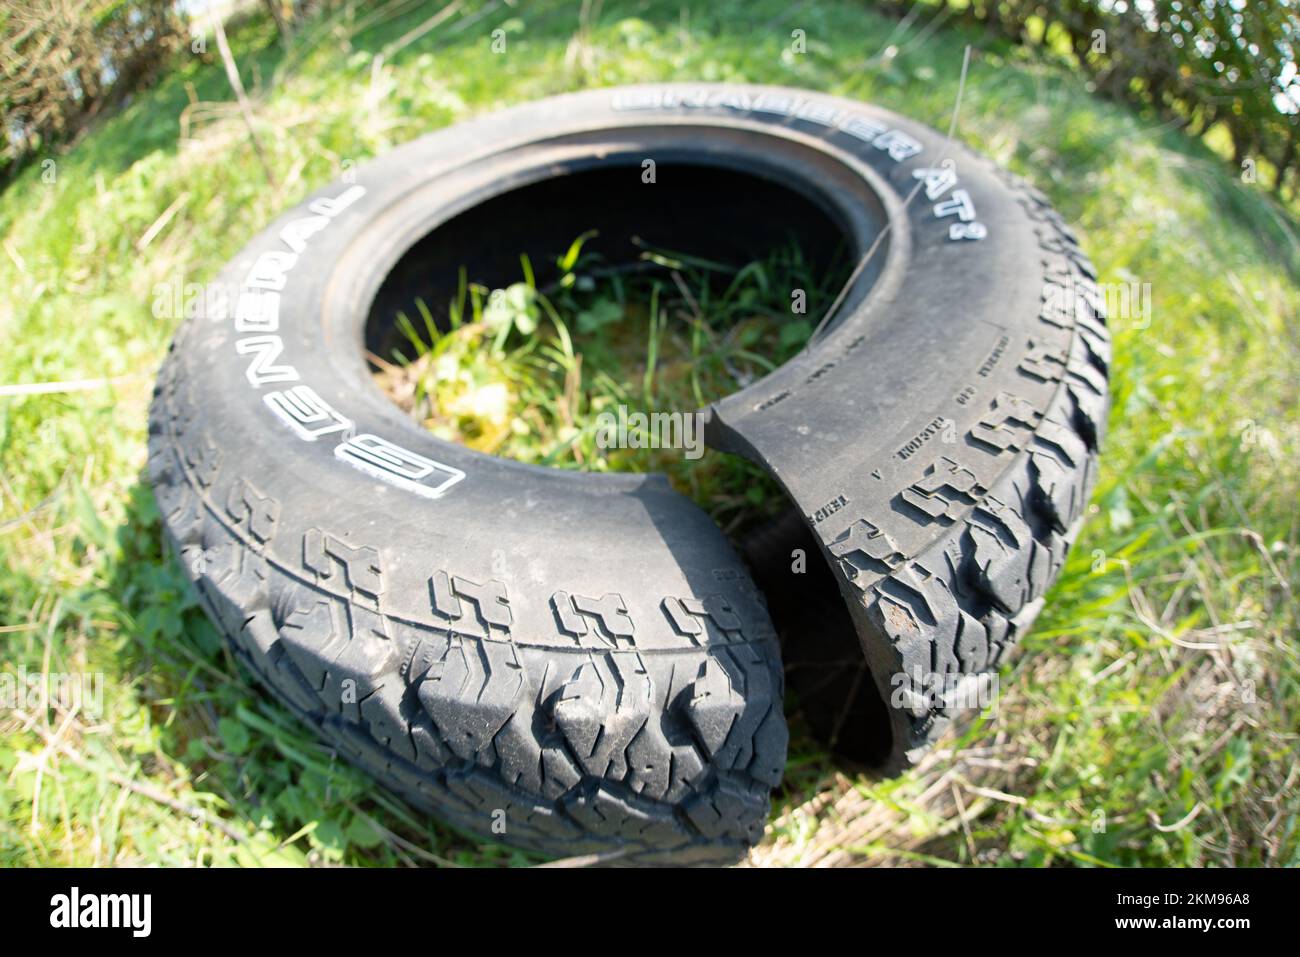 Abandoned Old Tyre UK Fly Tipping RubbishTire Stock Photo